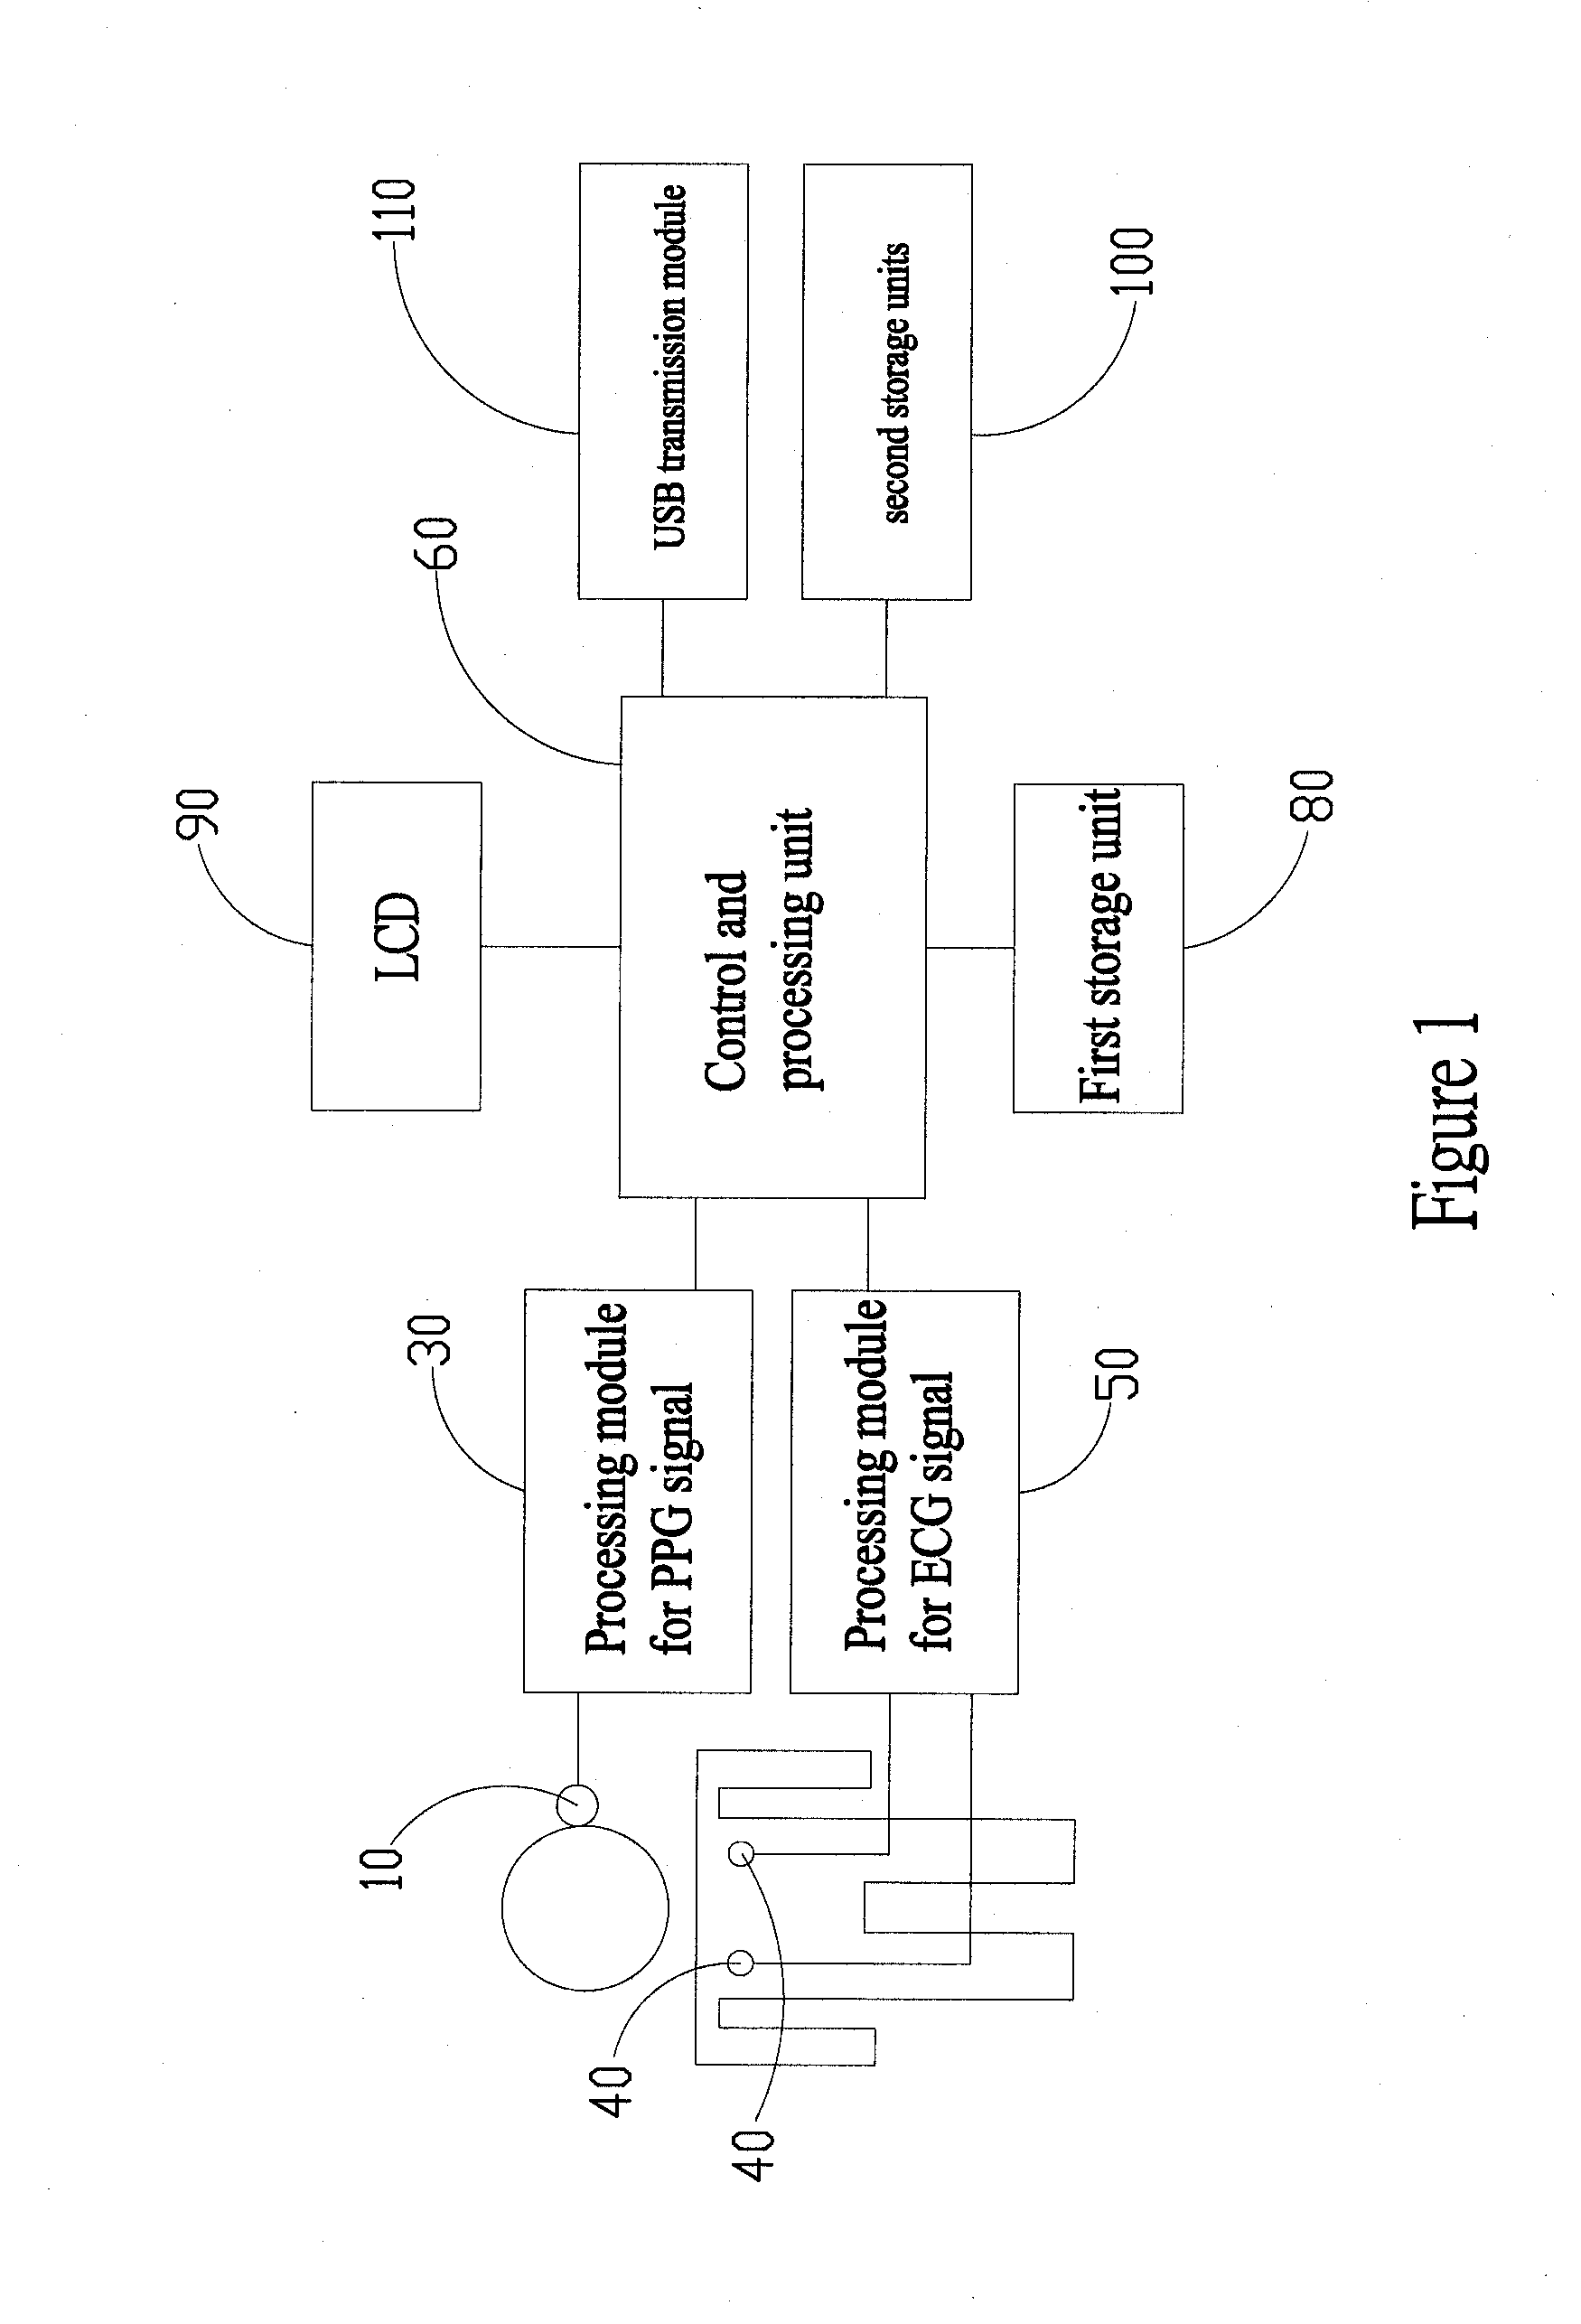 Measurement apparatus for heart rate variability